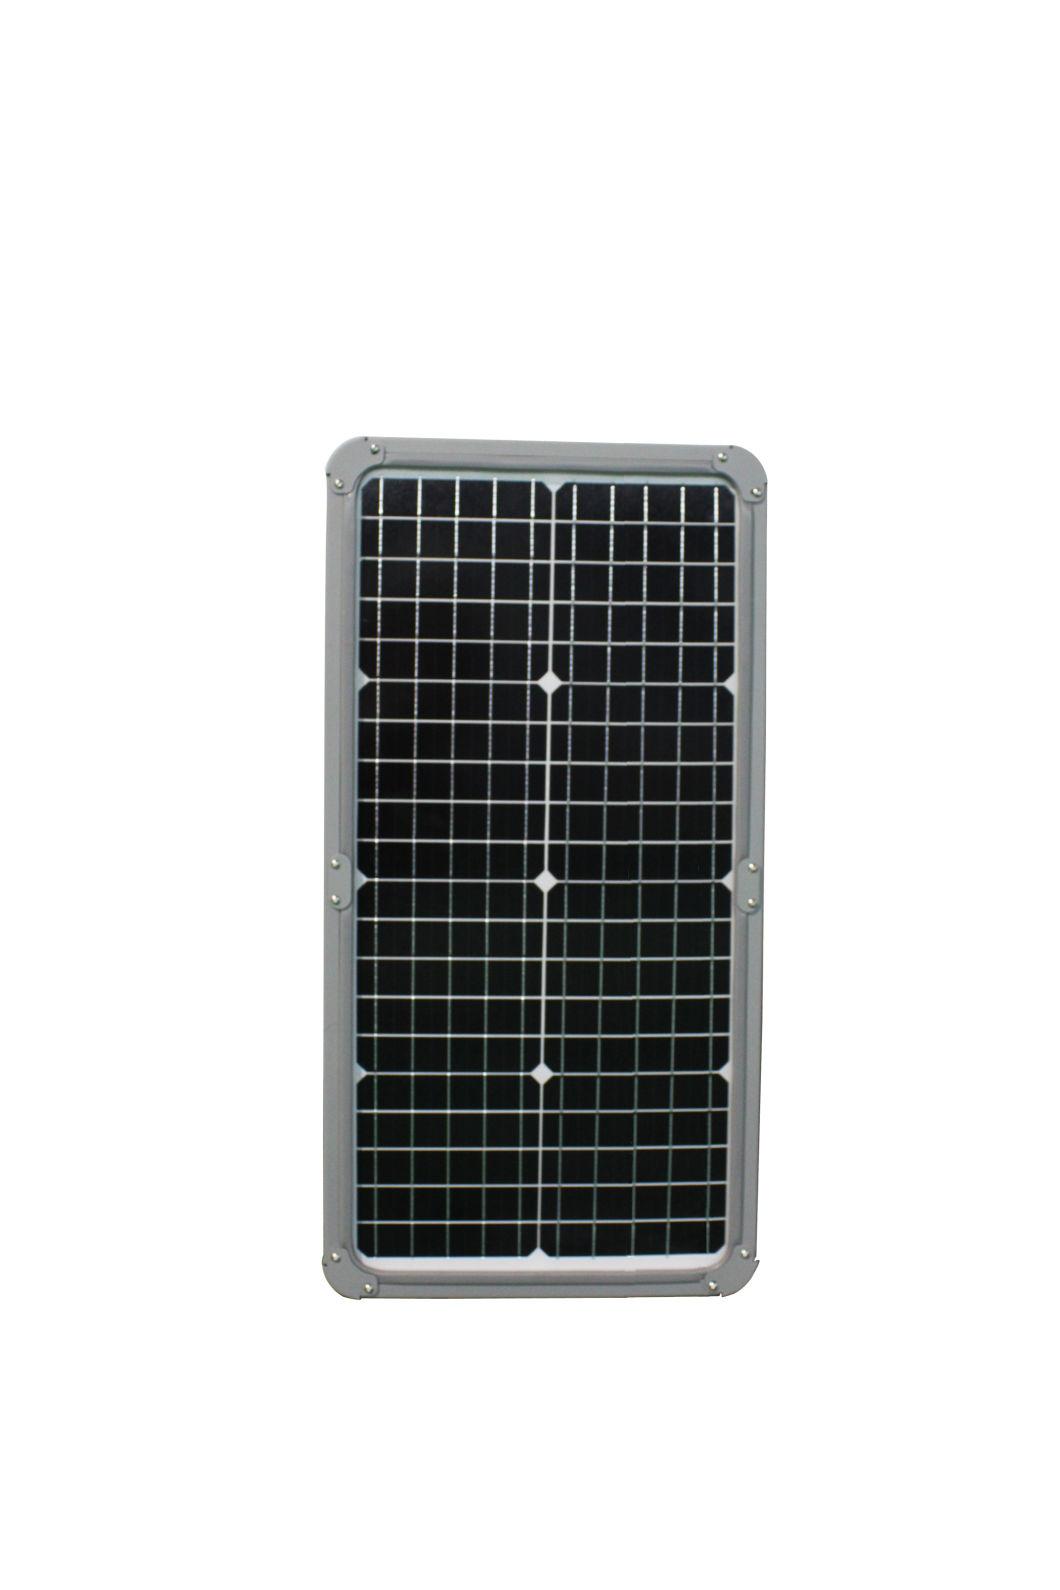 New Portable Solar LED Motion Outdoor Security Lighting with High Efficiency